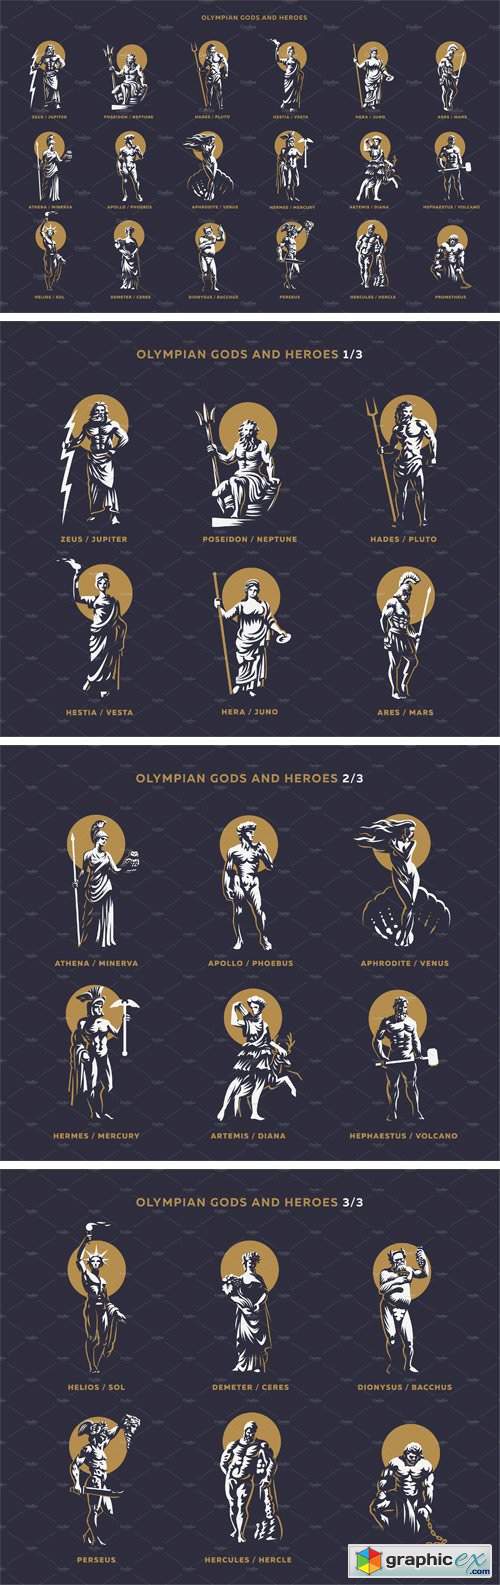 Olympic Gods and Heroes